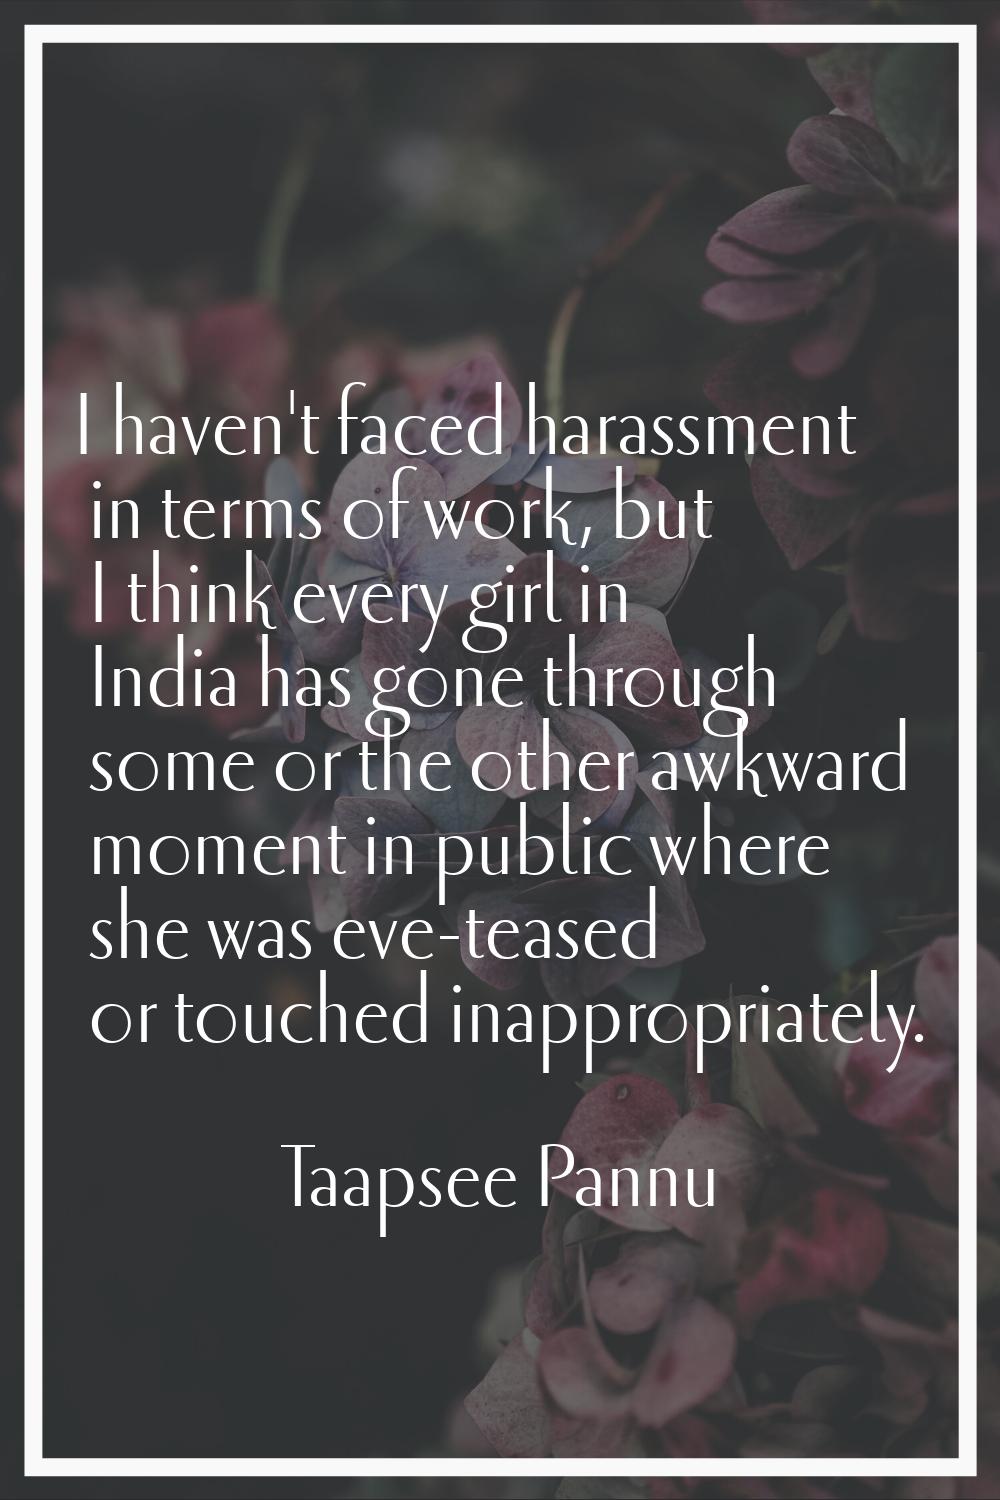 I haven't faced harassment in terms of work, but I think every girl in India has gone through some 